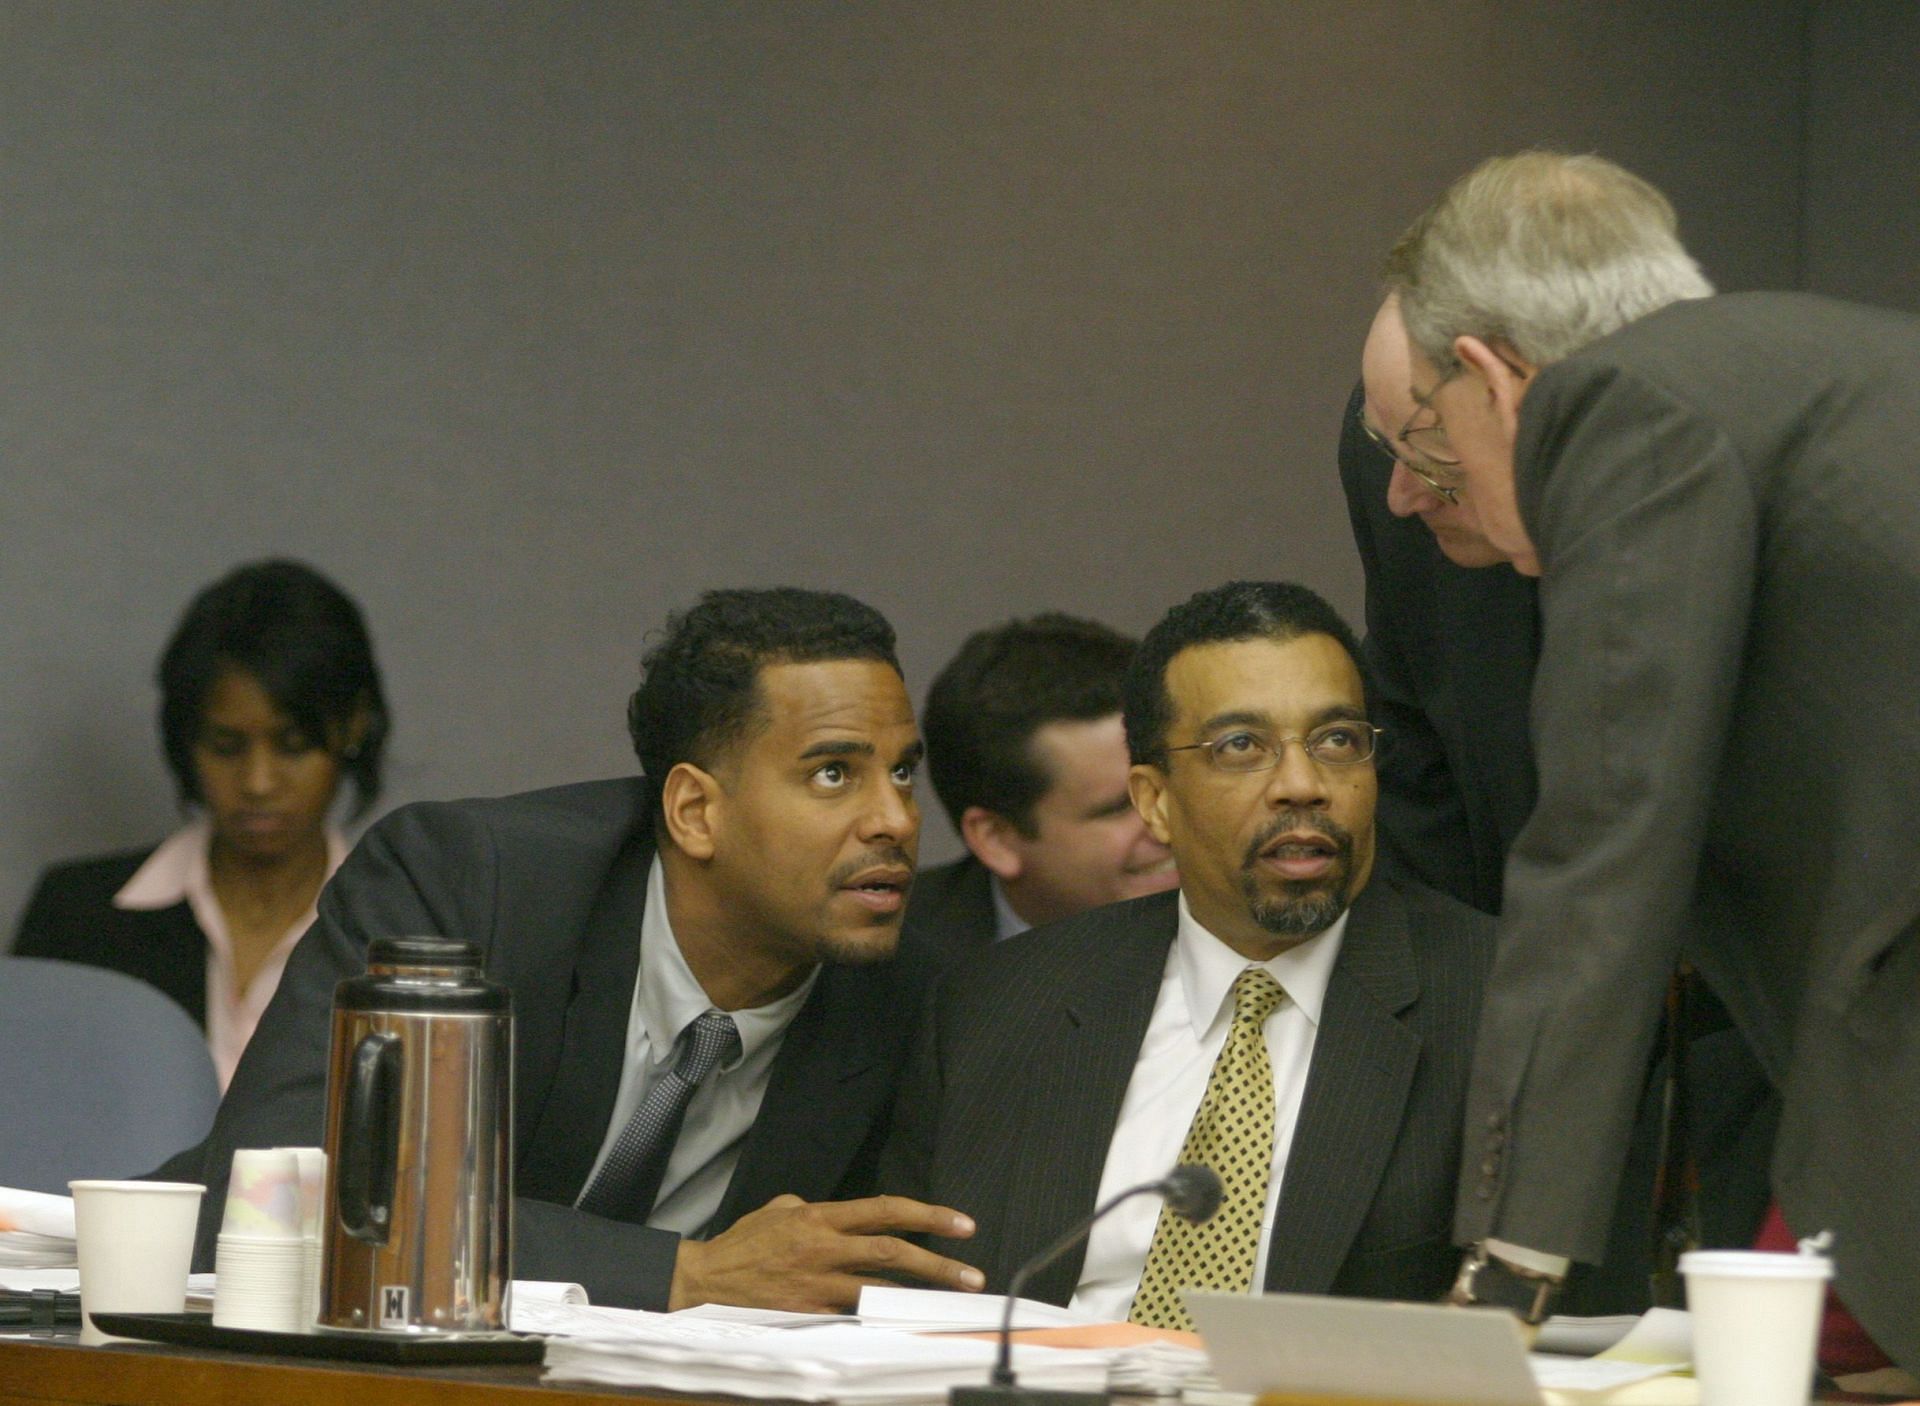 Williams pleaded guilty to aggravated assault in 2010 (Image via Getty Images)